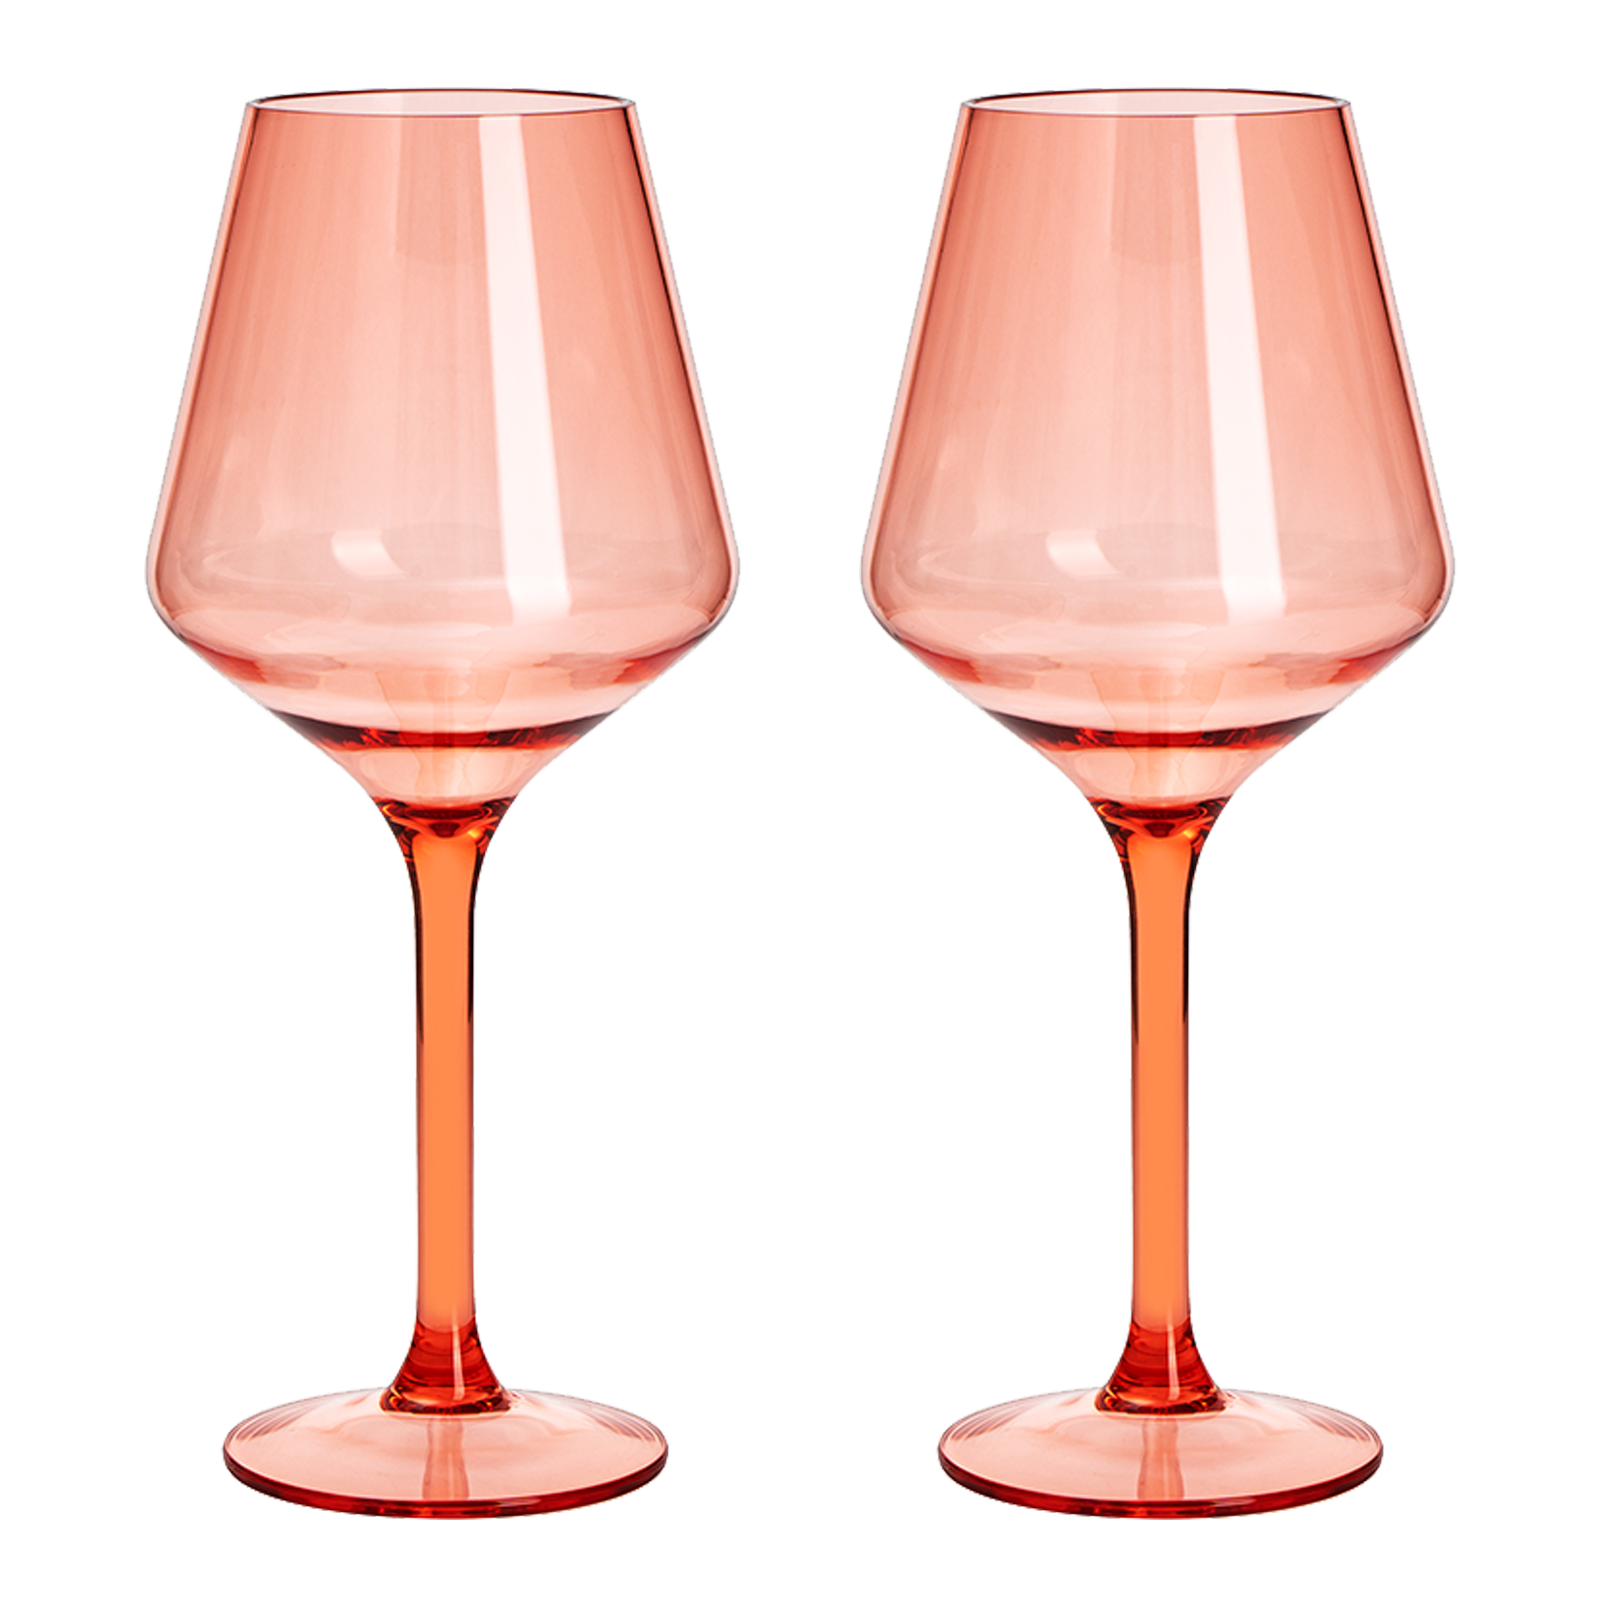 Floating Wine Glasses For The Pool - Set of 2 Shatterproof 21 Oz Plastic Wine  Glasses That Float - Versatile Unbreakable Tritan Cups With Stem For Both  Indoor and Outdoor Use At